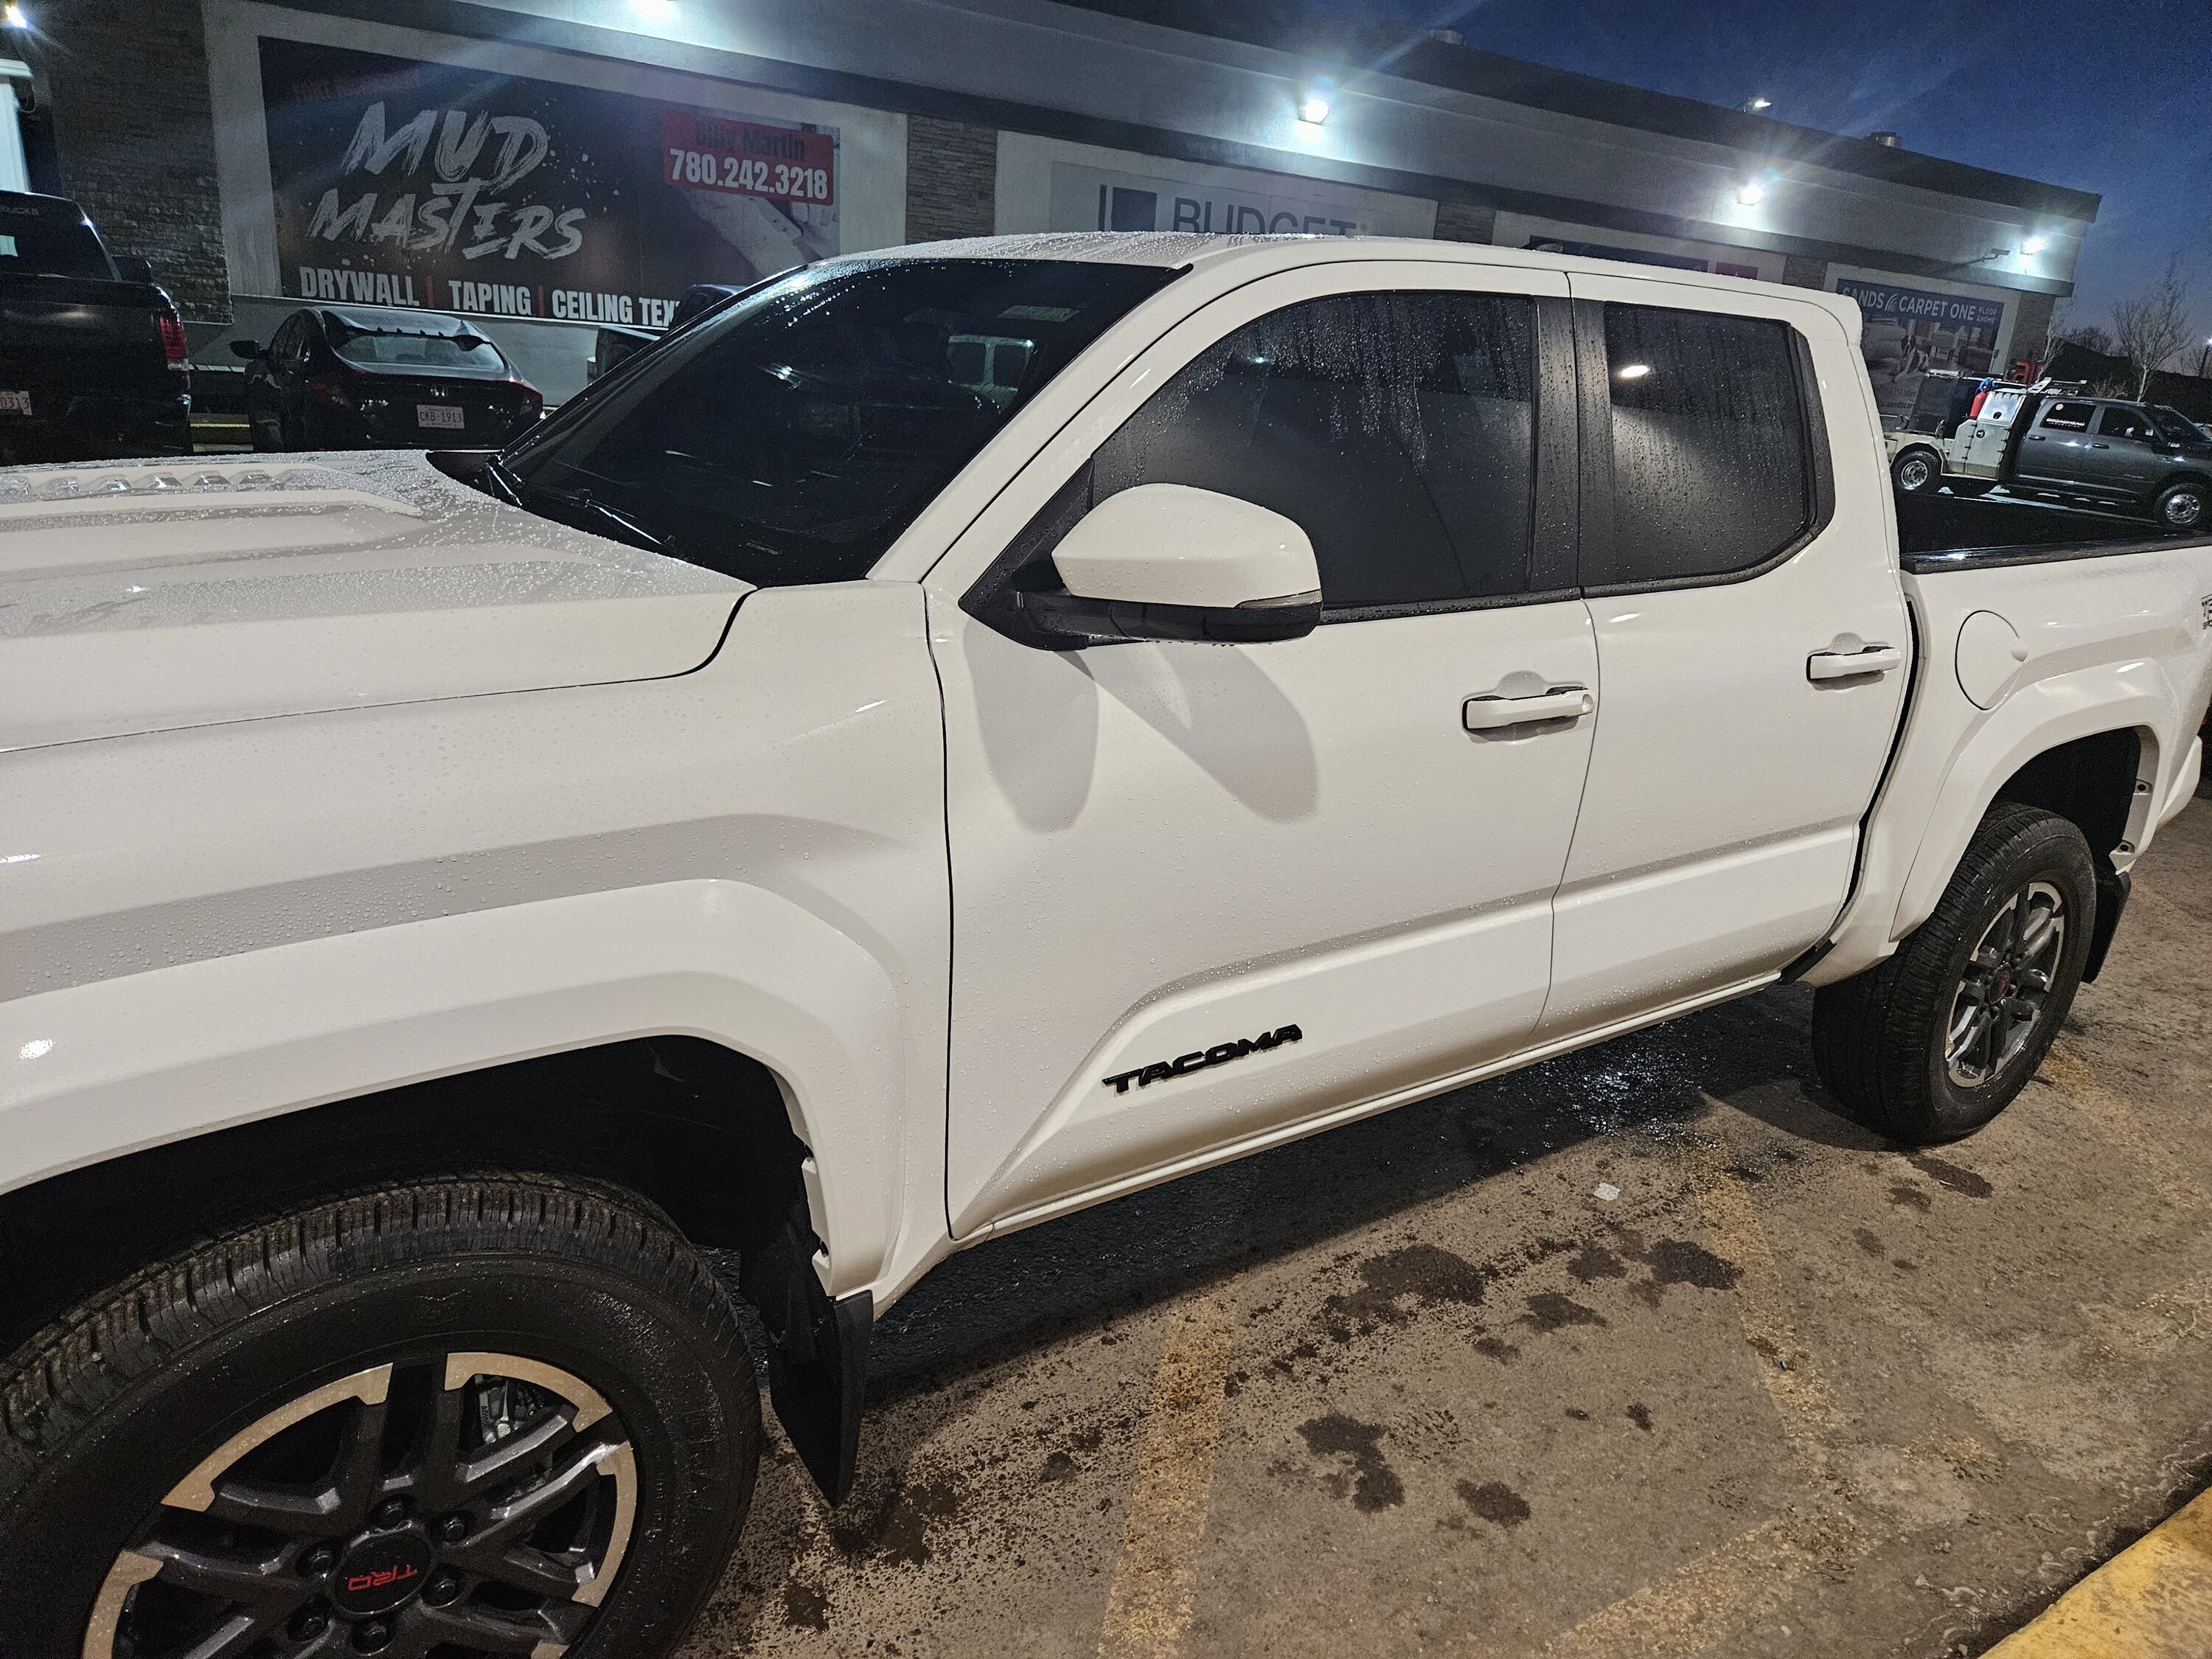 2024 Tacoma 20% Ceramic Tint on front windows to match factory rear window tints 1000003393